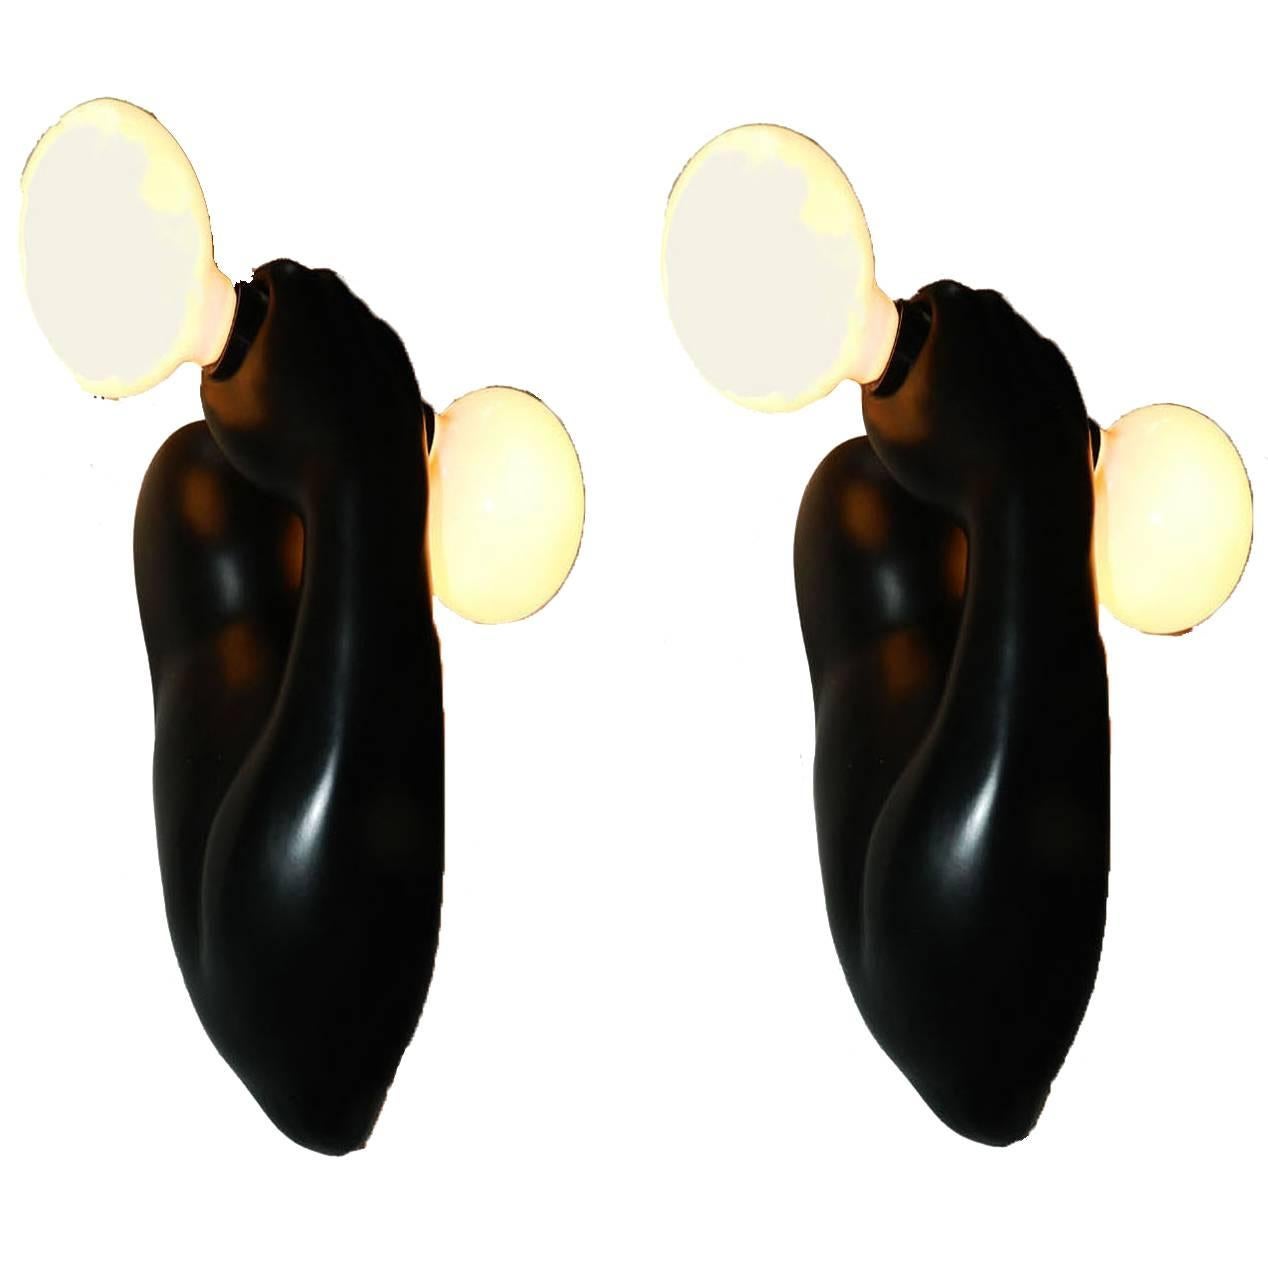 Signed J. Peire Pair of Sconces For Sale